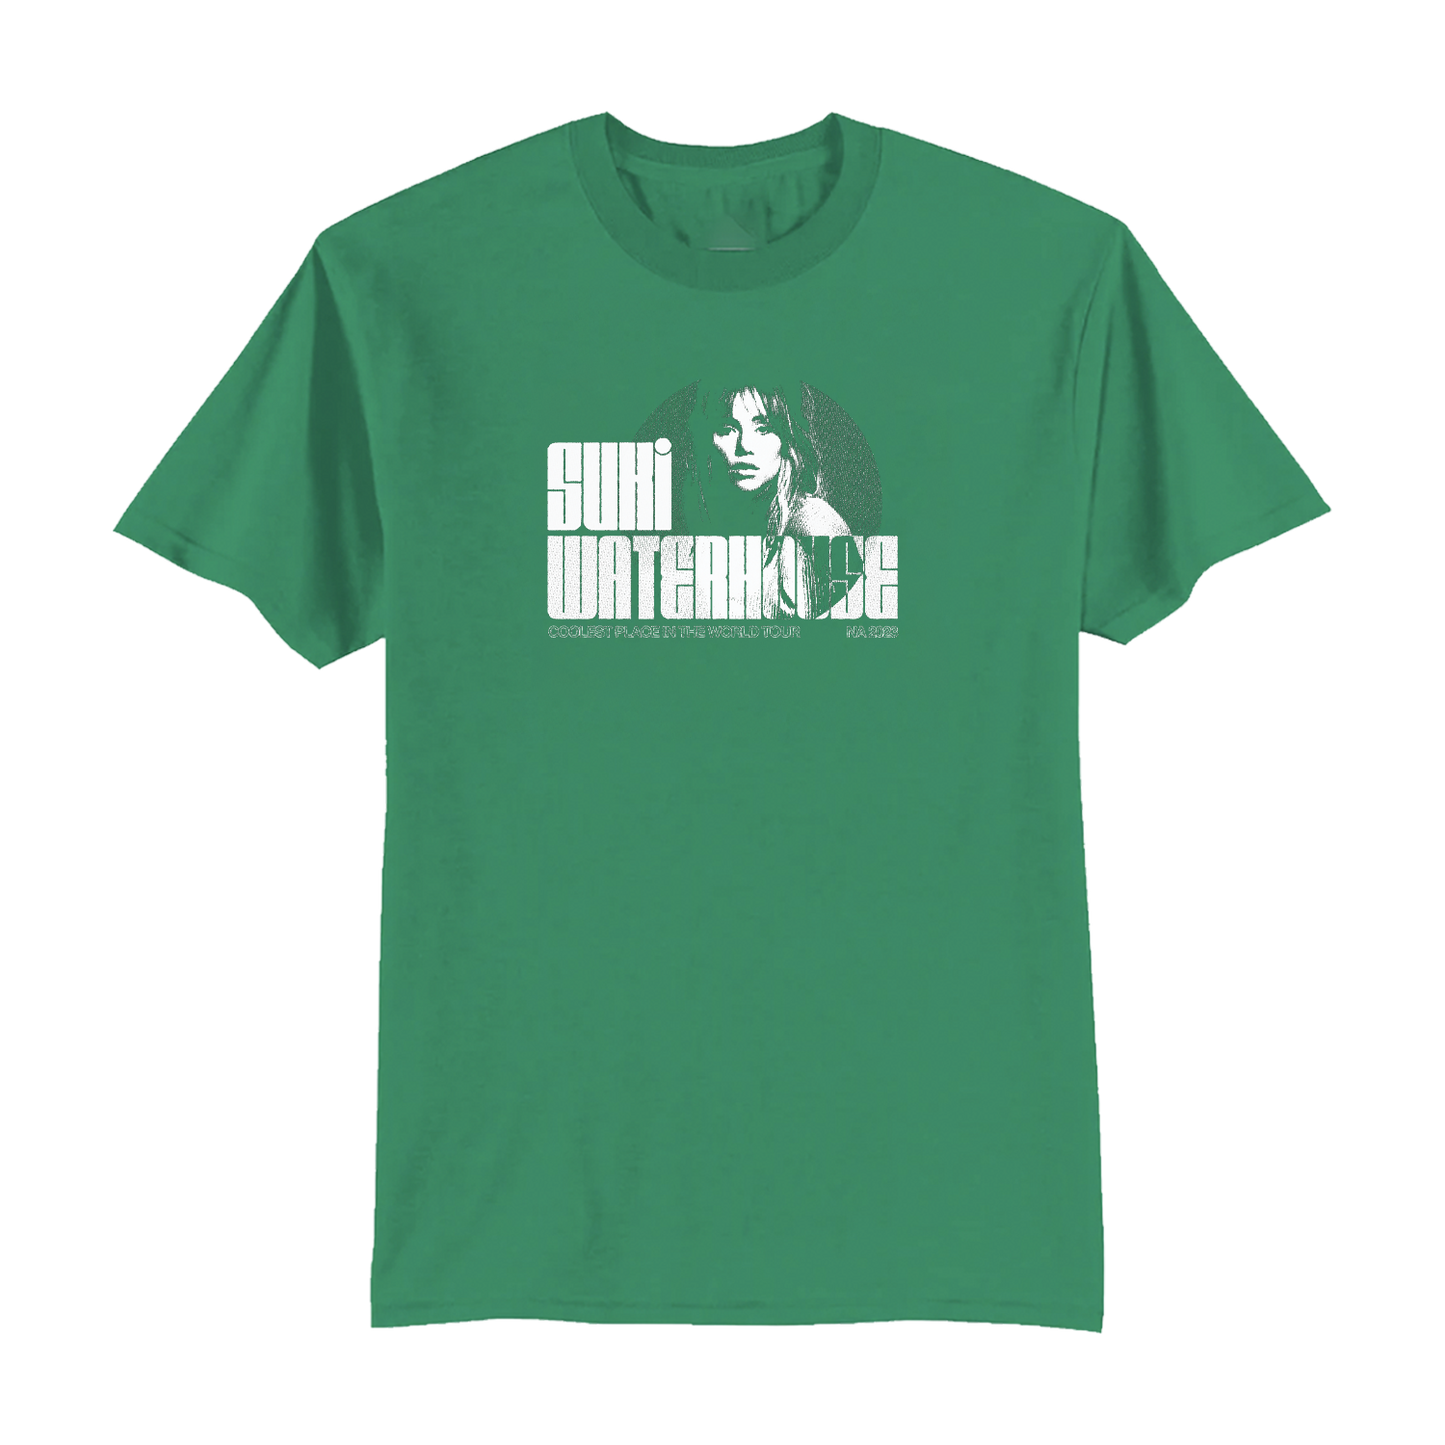 Coolest Tour Dates Tee - Green